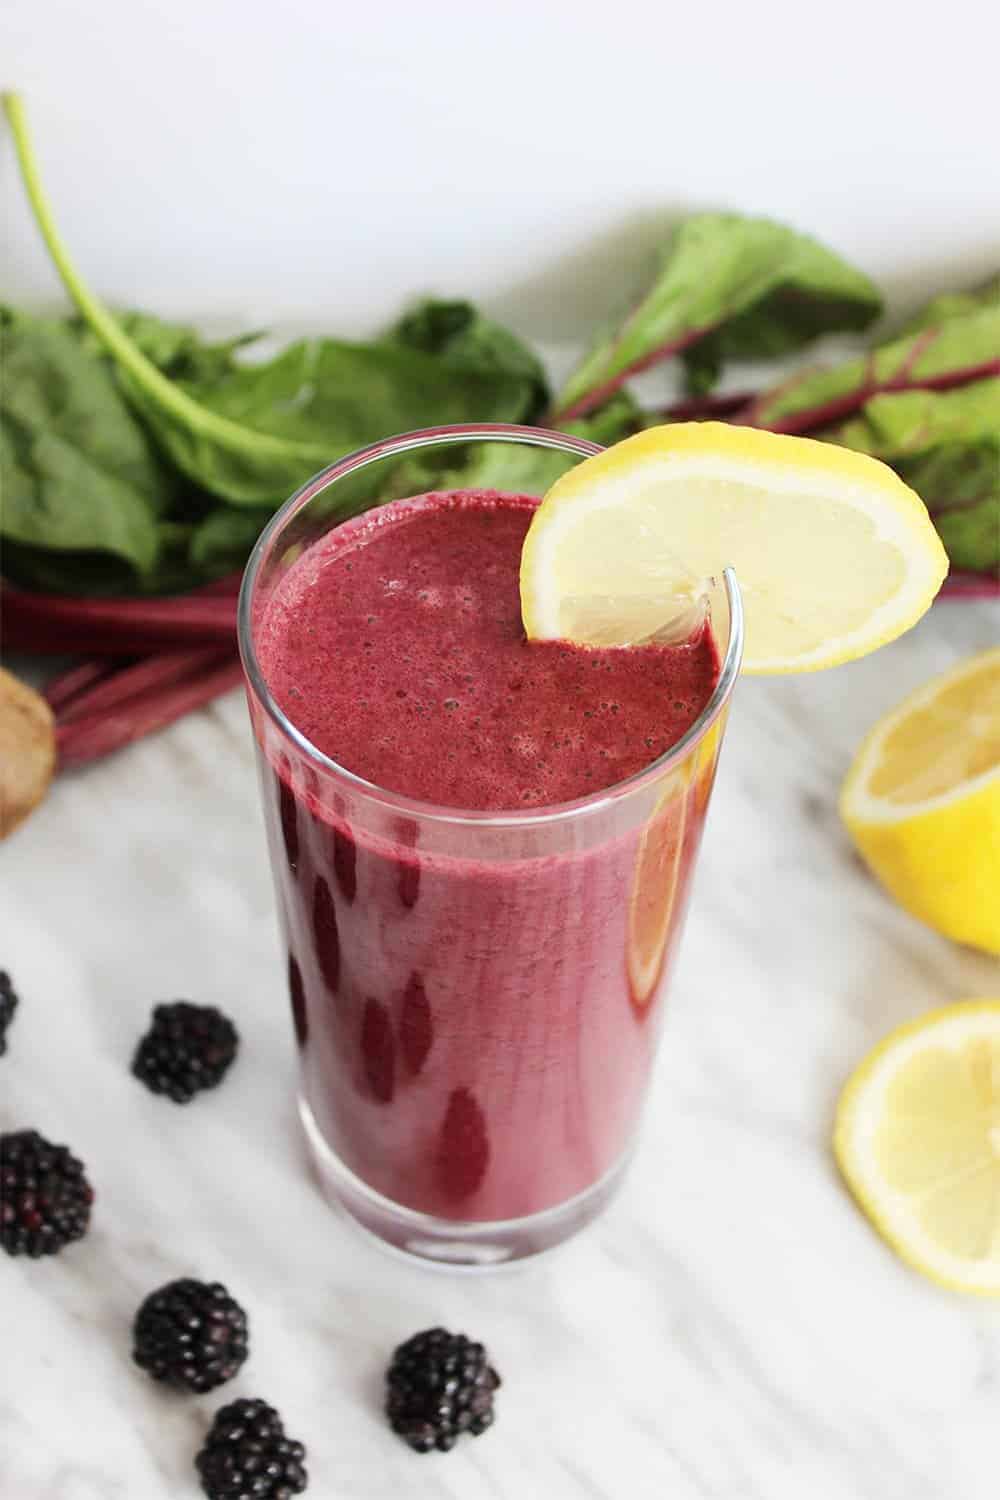 A tall glass of beet smoothie, garnished with a lemon slice